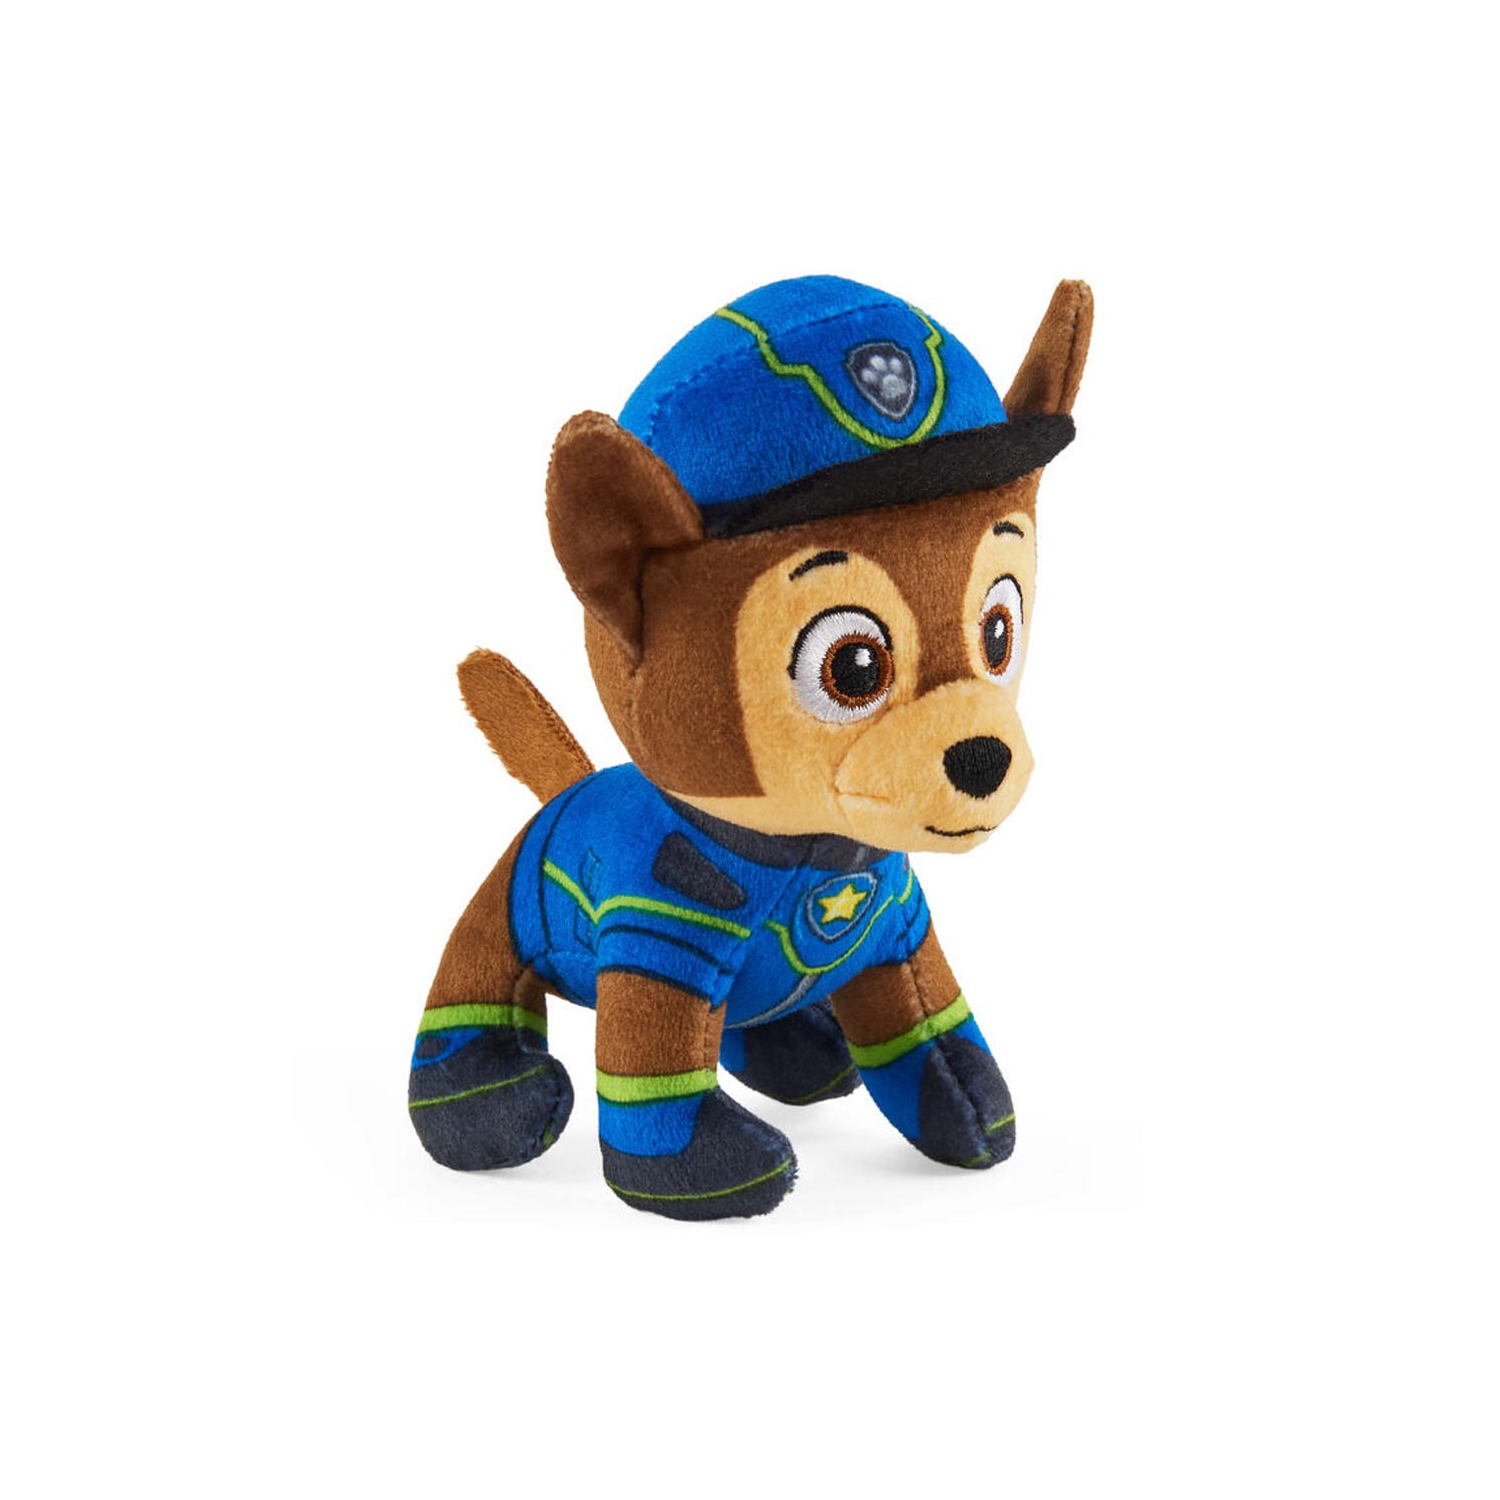 PAW Patrol, 5-inch Spy Chase Mini Plush Pup, for Ages 3 and up